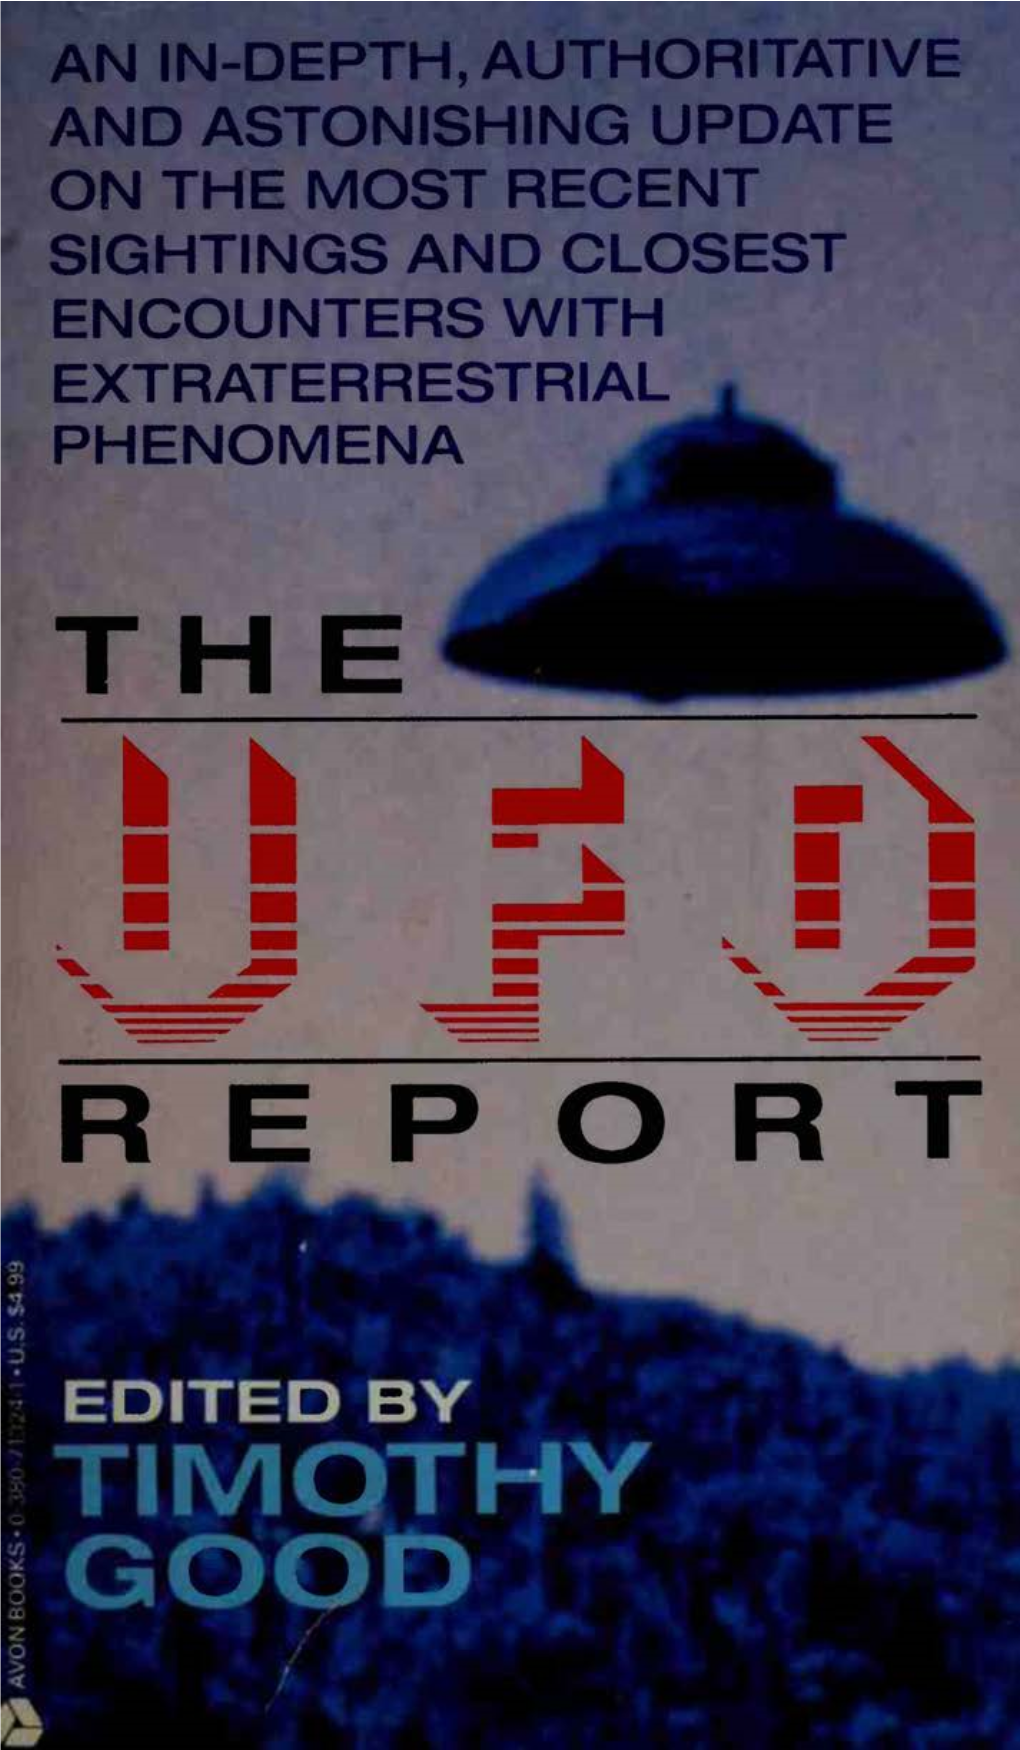 THE UFO REPORT App Endix Some Major UFO Organizations 223 the Crop Circles 224 Some UFO Journals 225 Bibliography 226 Services 228 Index 231 Editor's Foreword